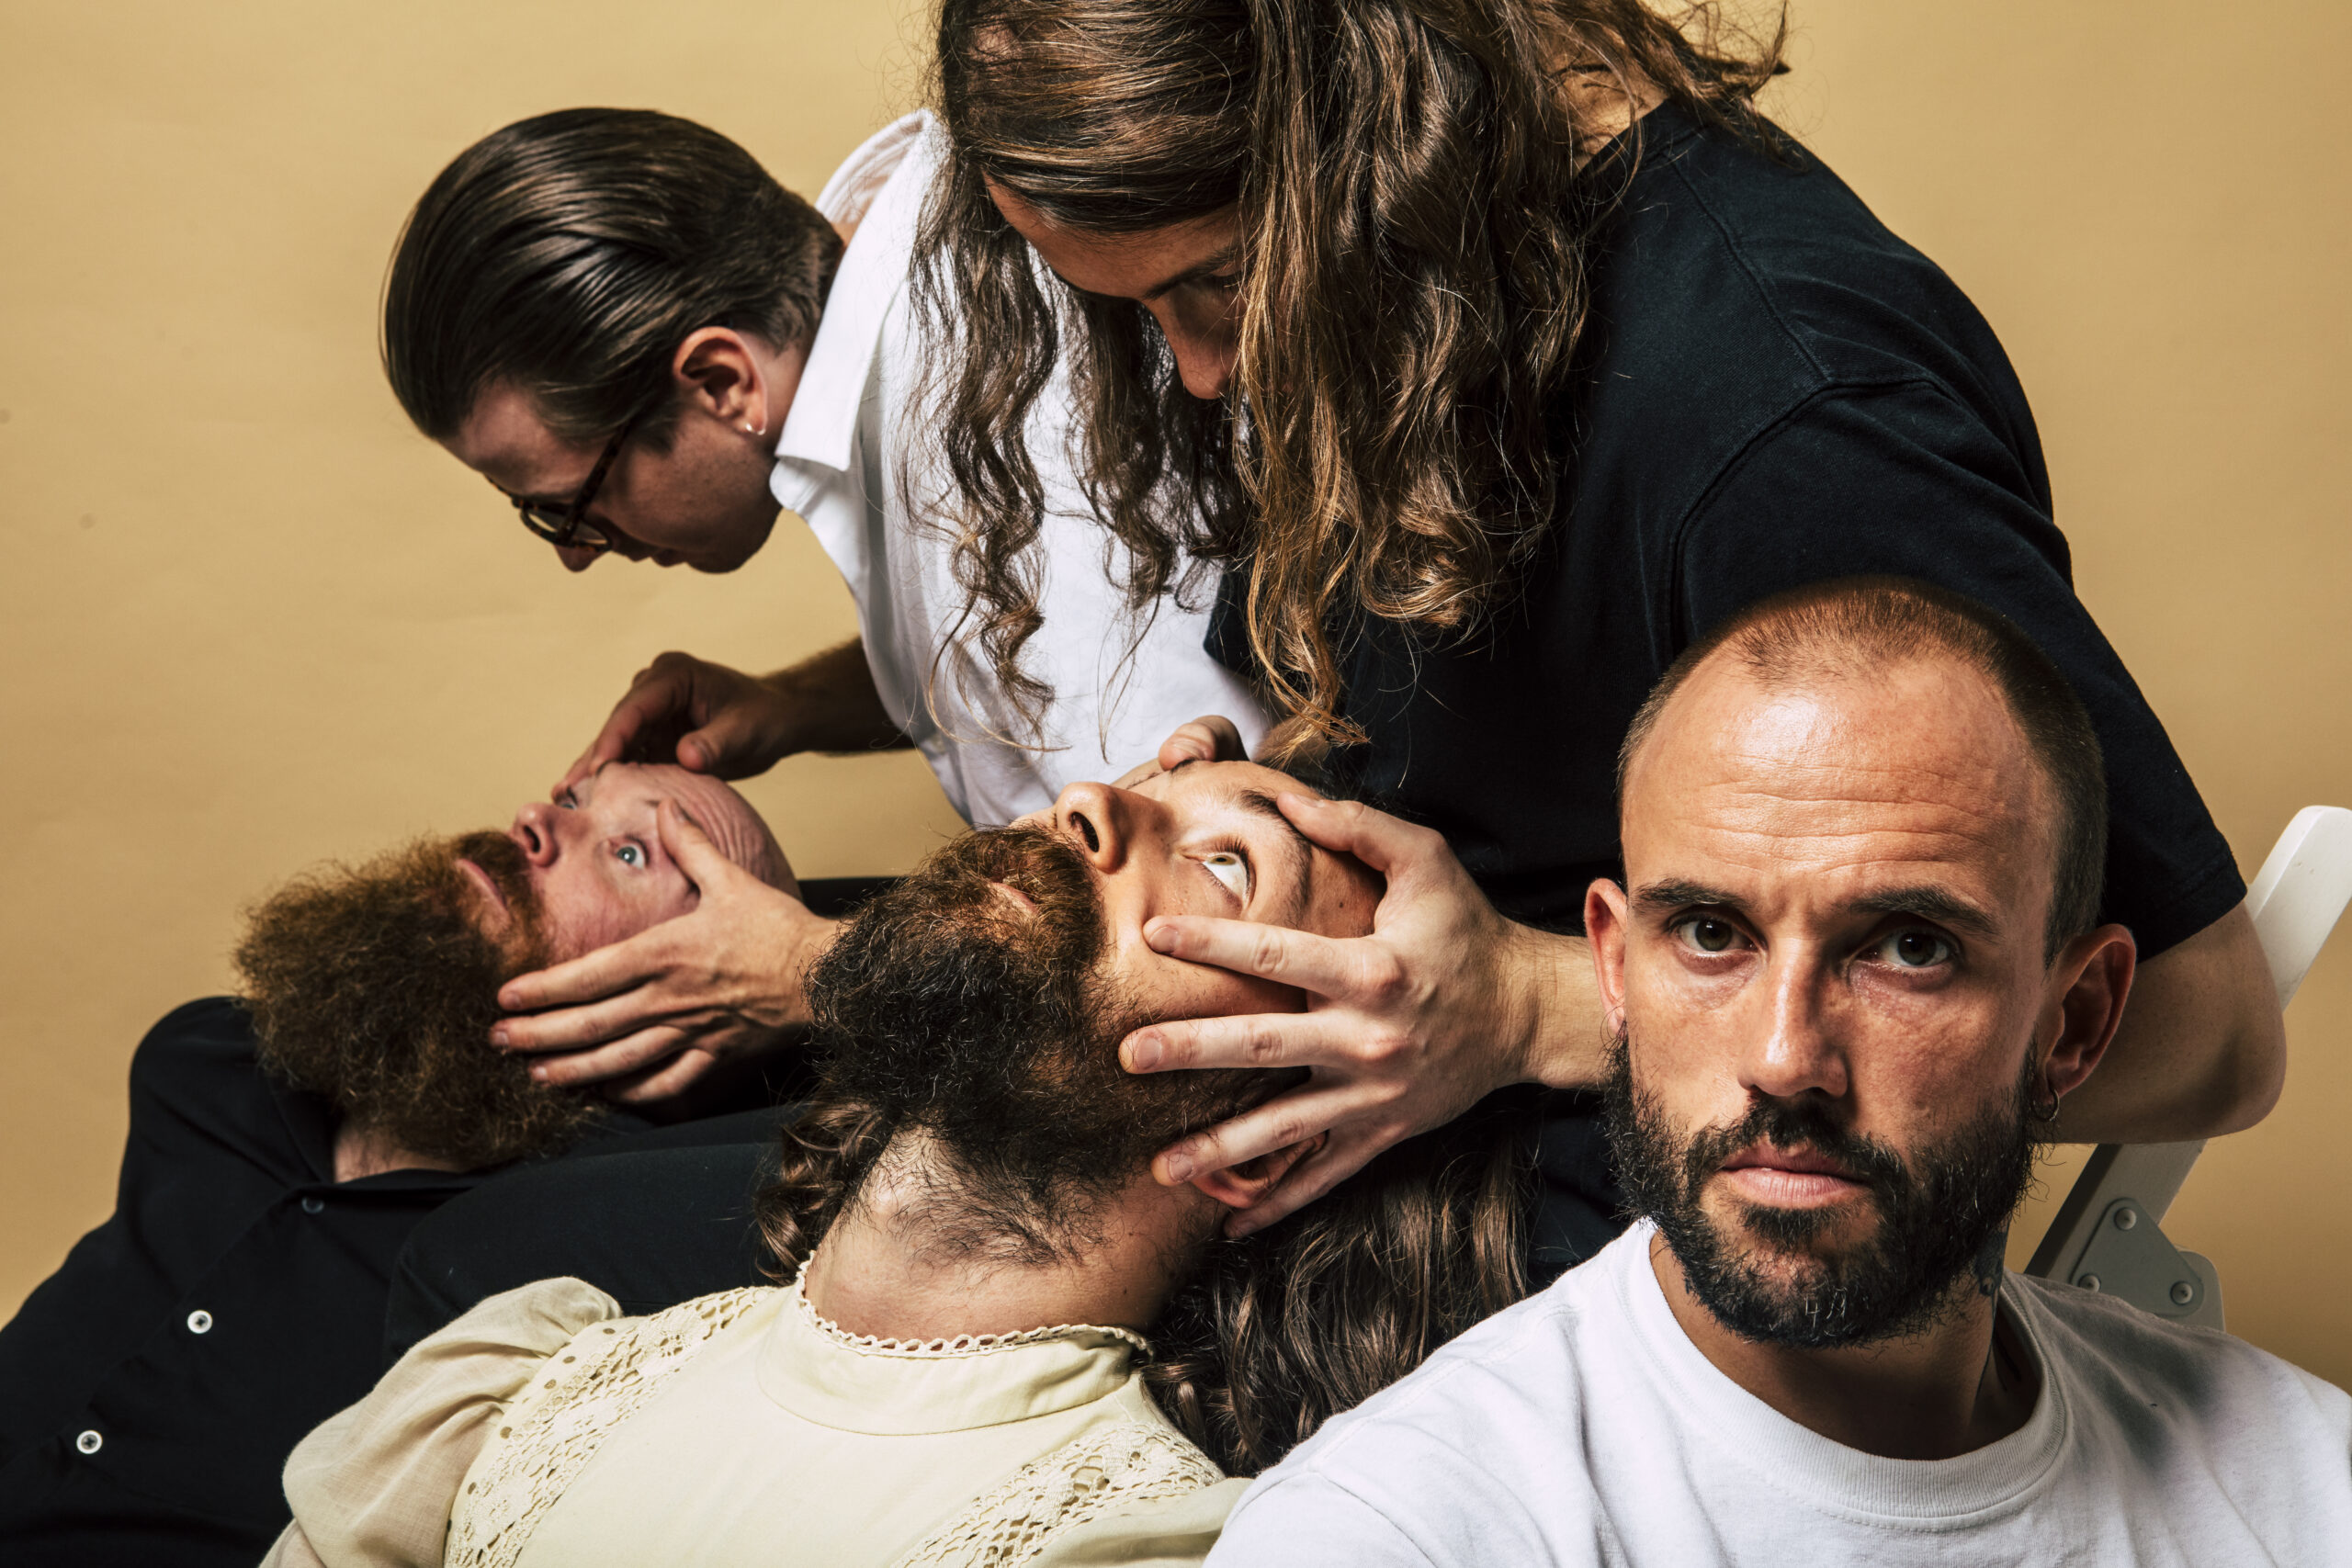 Exit Interview: IDLES' Mark Bowen on Evolving <i>Crawler</i> Material, Grammy Nods, and the Allure of Spicy Candy